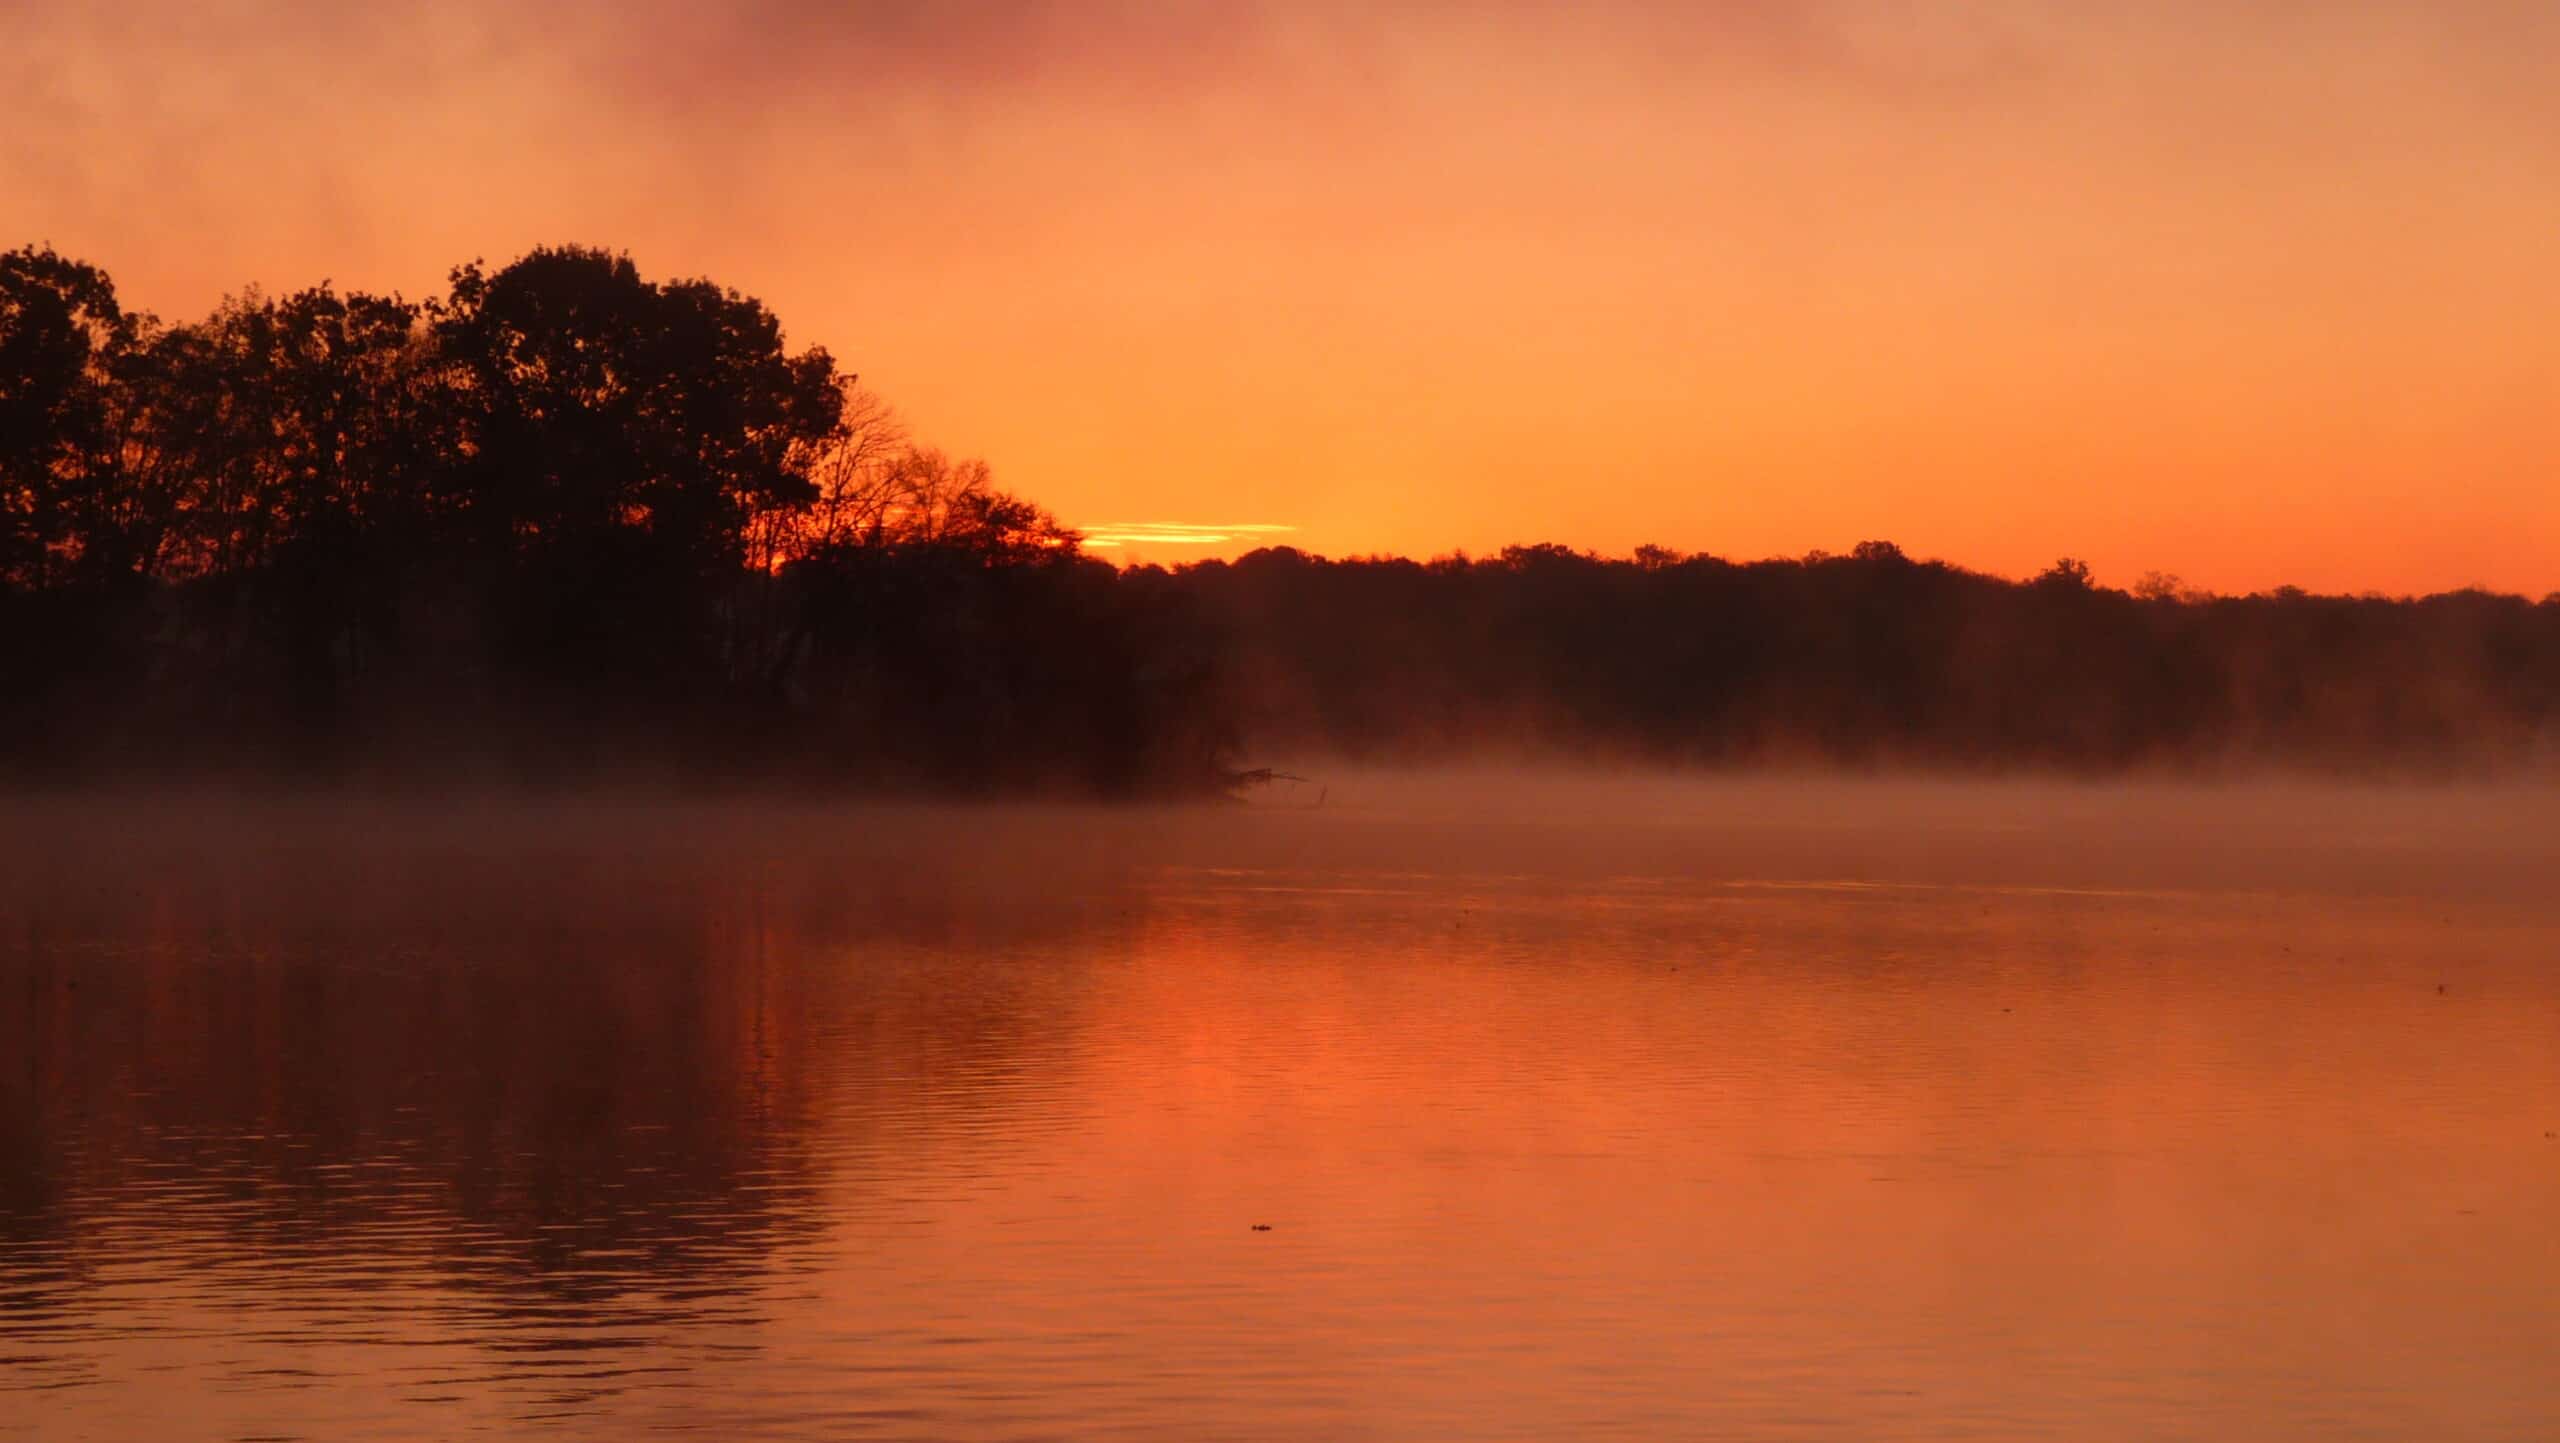 Sunrise on Old Hickory Lake in Hendersonville, Tennessee by dan-holland